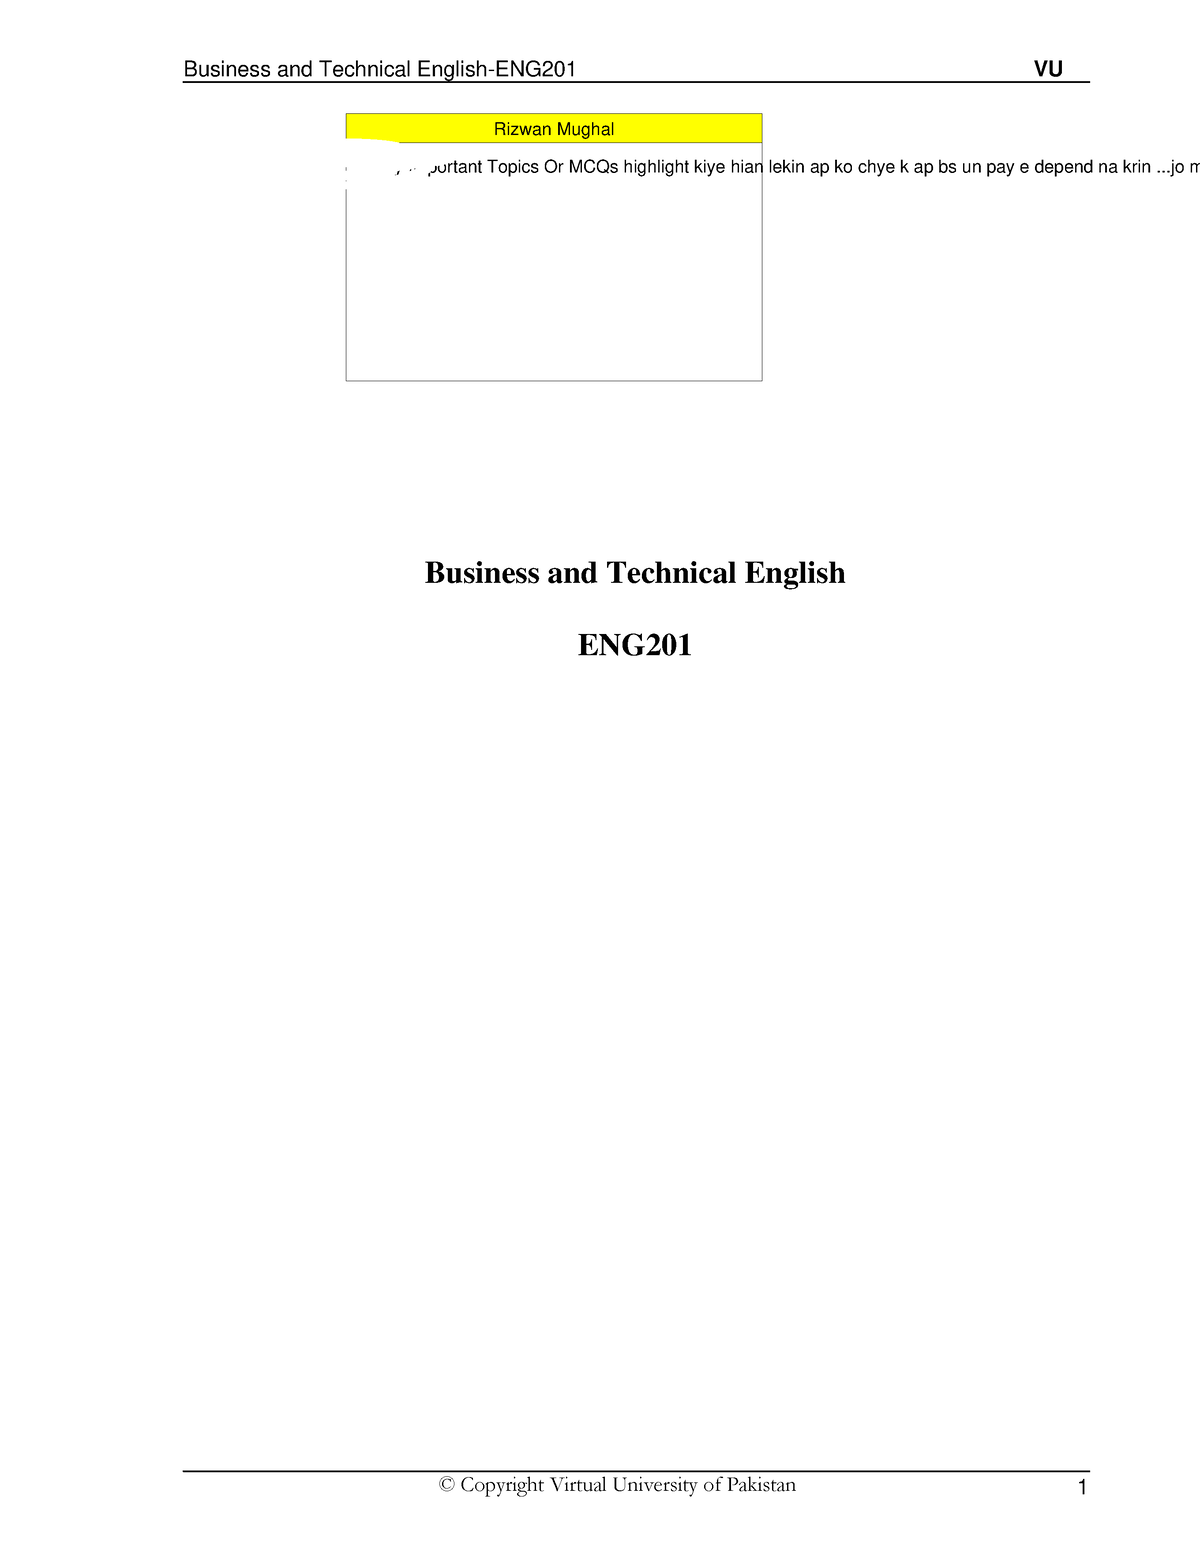 eng201 business and technical english writing assignment 1 2021